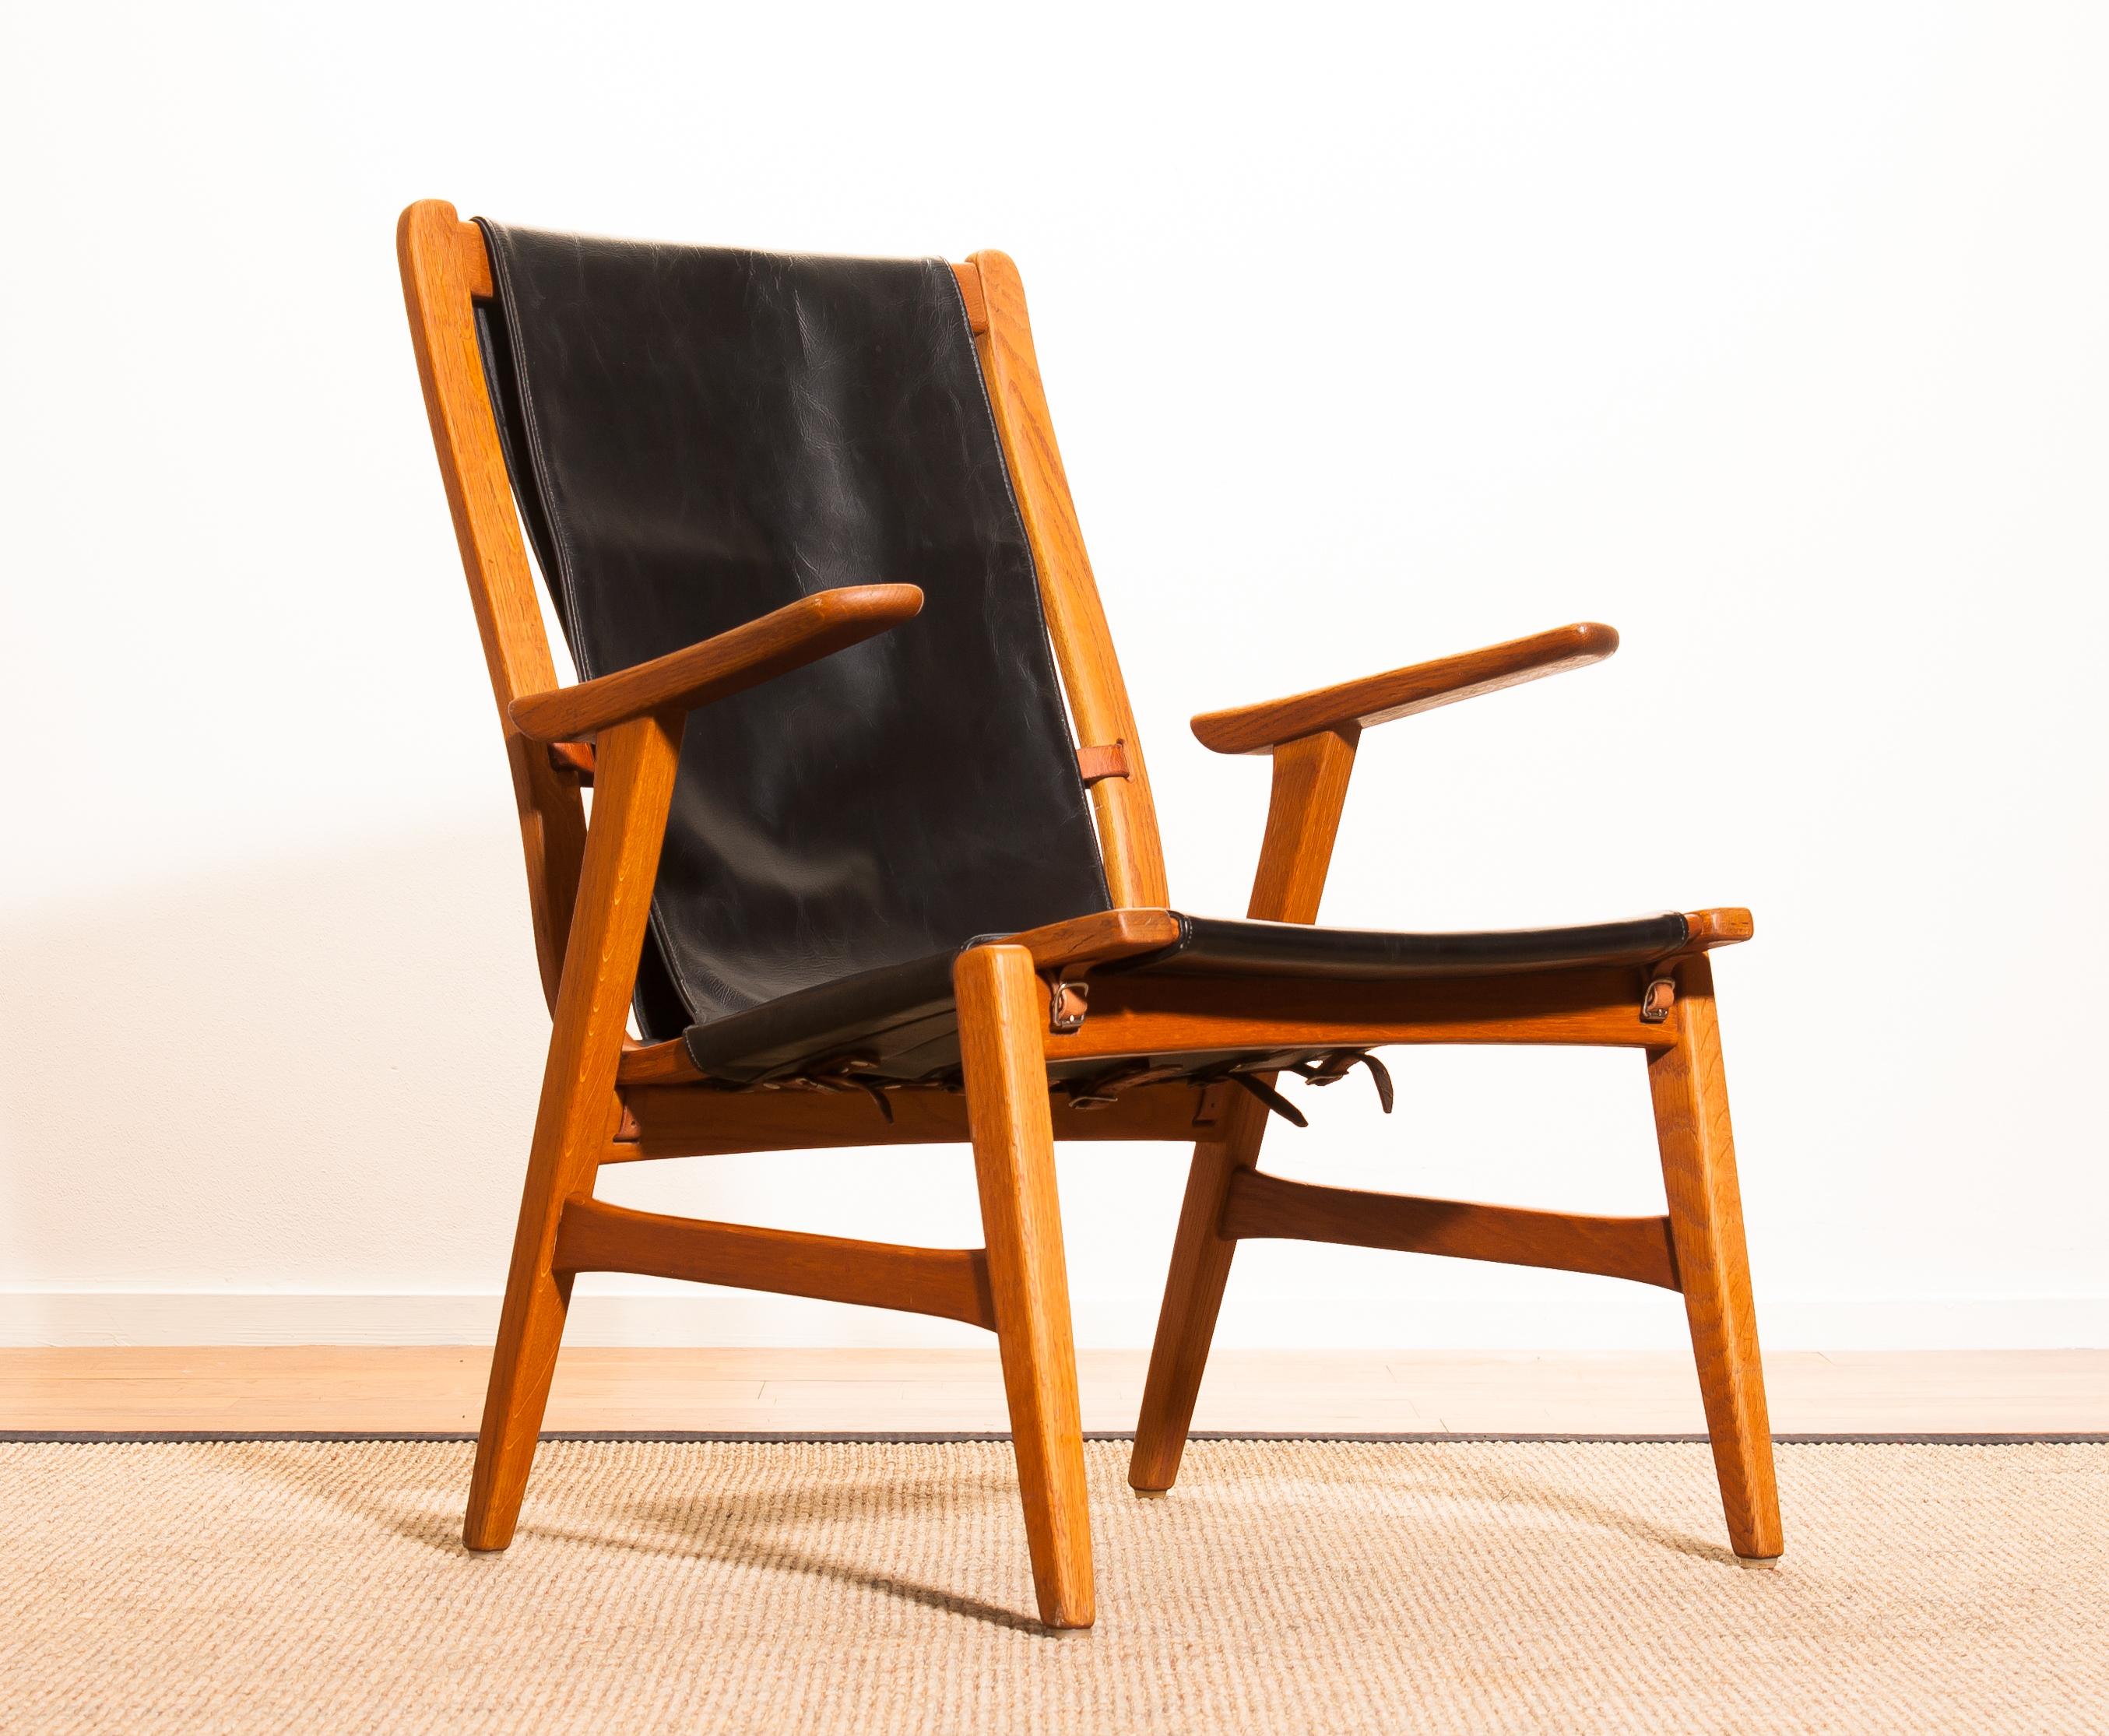 Wonderful hunting chair 'Ulrika' designed by Östen Kristansson for Vittsjö, Sweden.
This beautiful chair is made of an oak frame with a black leather seating.
It is in a very nice condition,
Period 1950s.
Dimensions: H 82 cm, W 62 cm, D 60 cm,